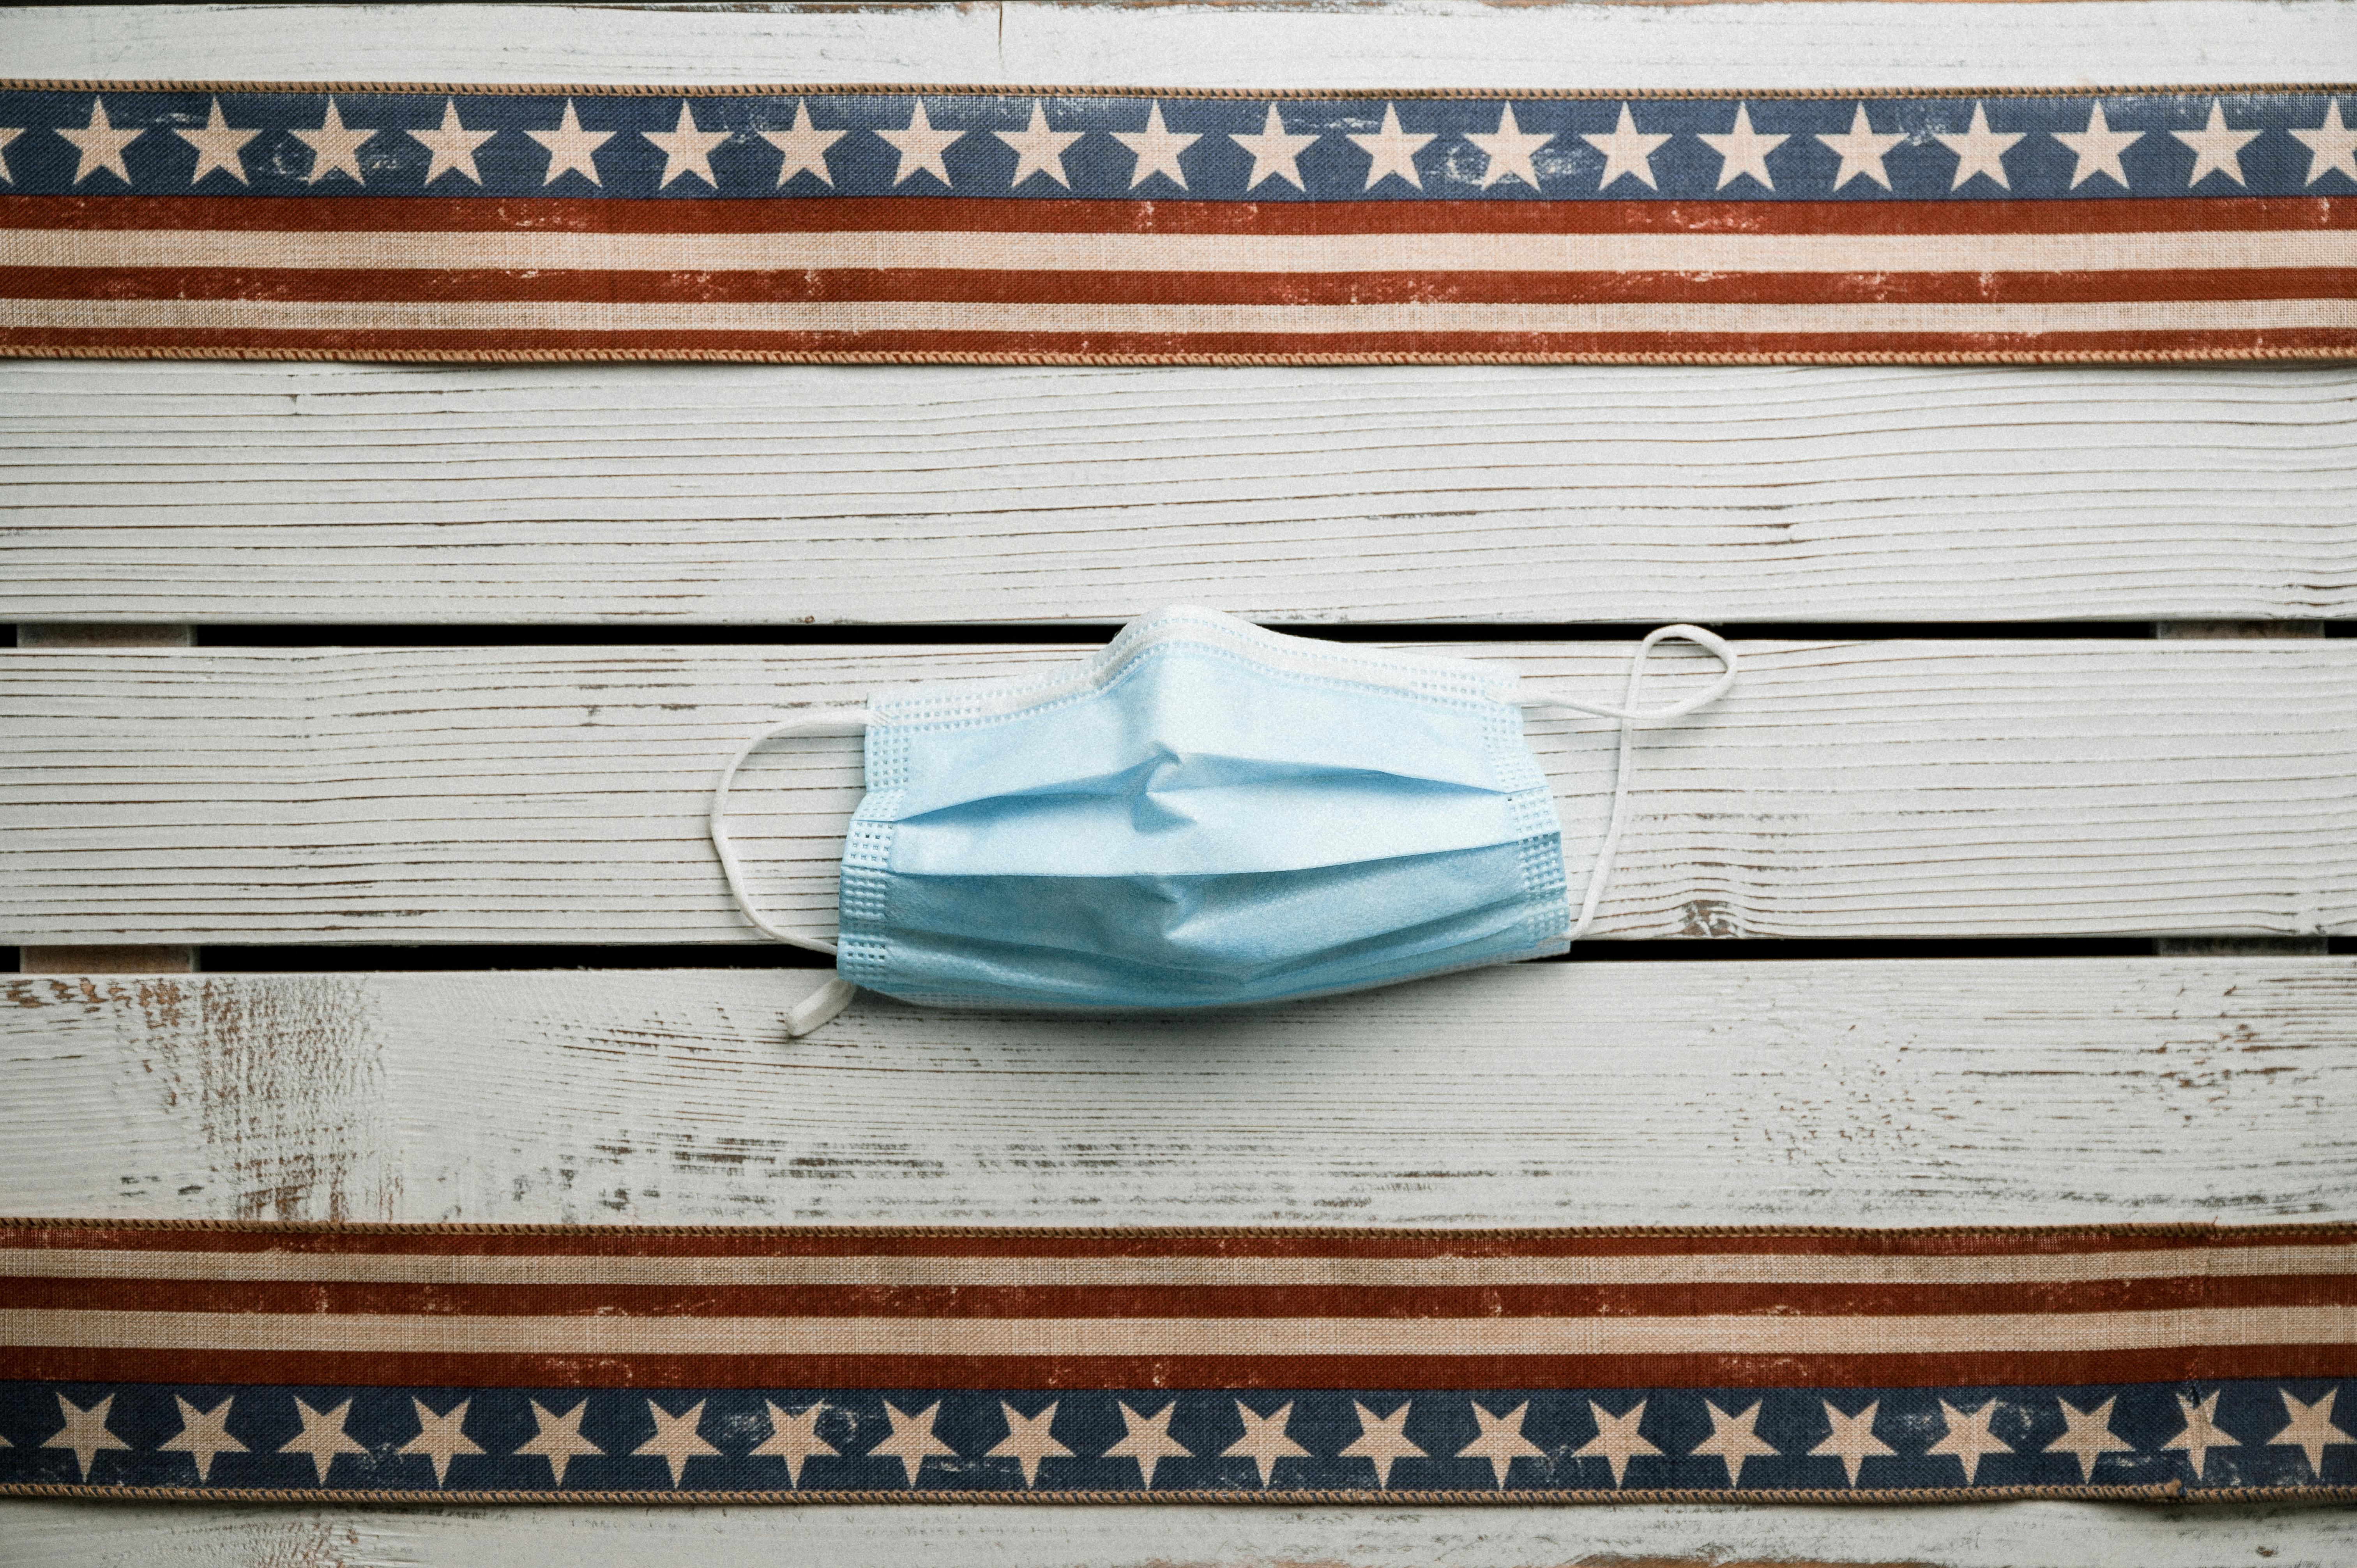 Top view of sterile face mask placed on white shabby wooden table with American flag ribbons